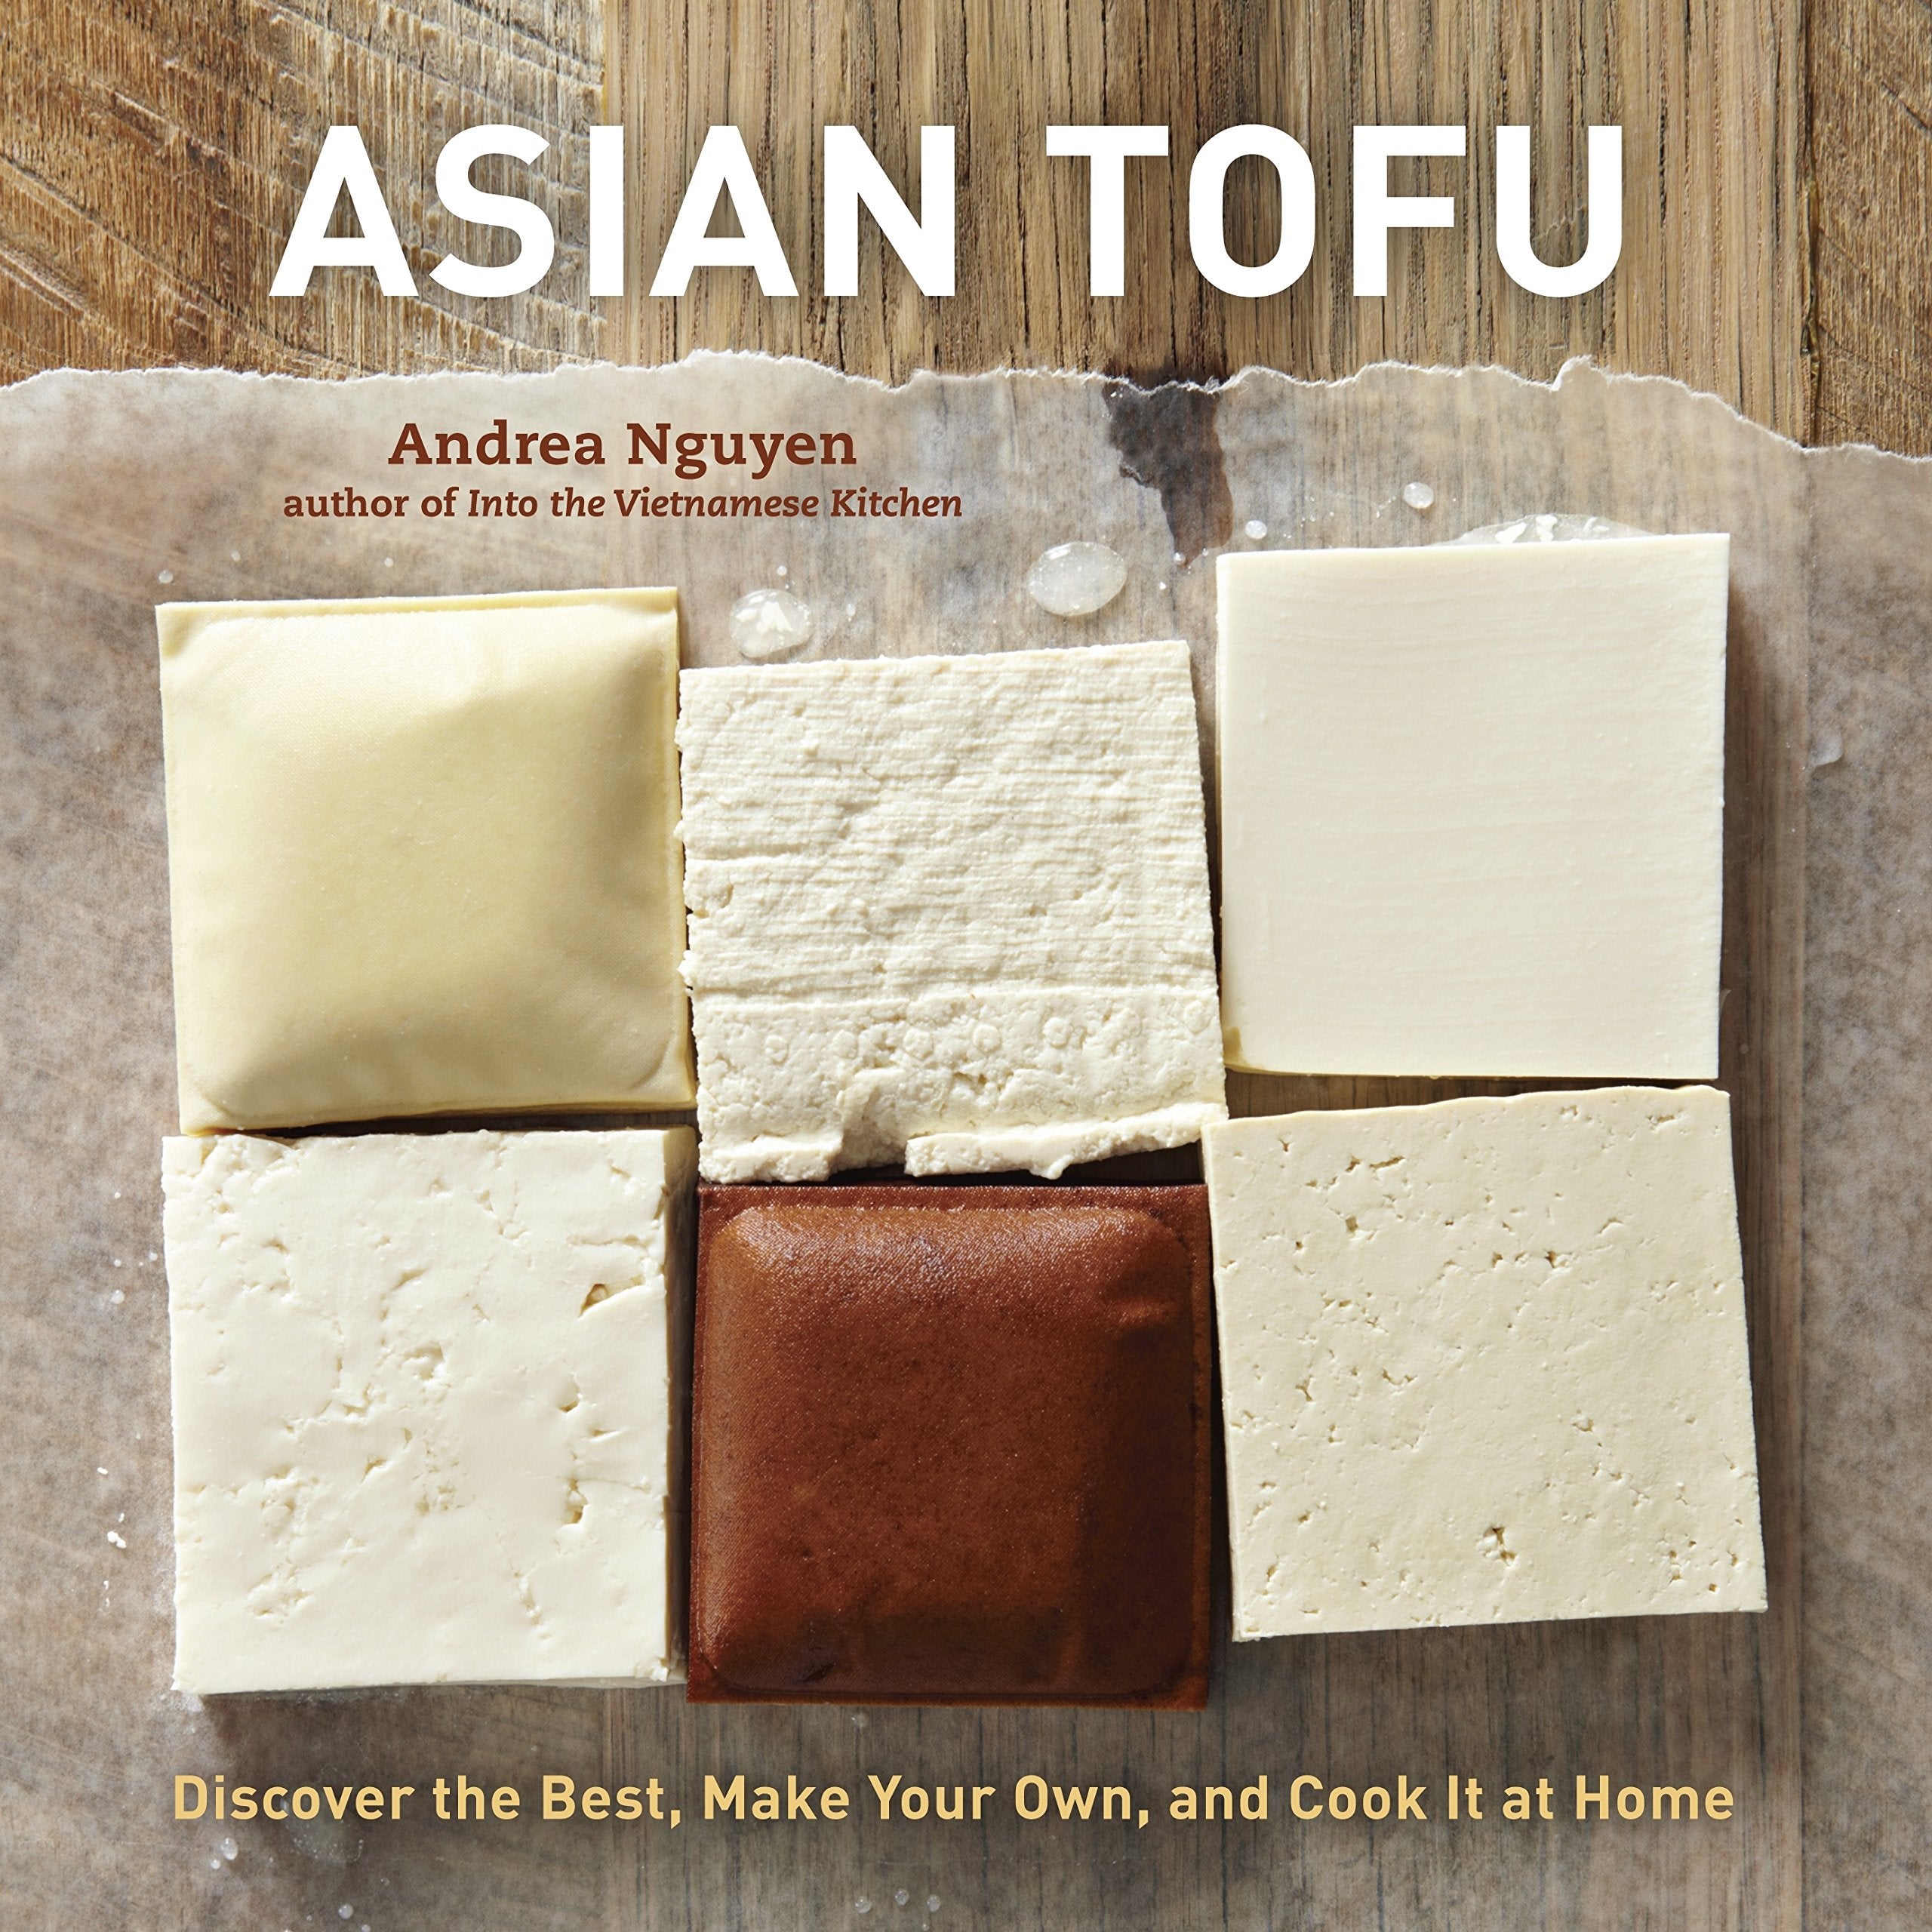 Asian Tofu: Discover the Best, Make Your Own, and Cook It at Home (Andrea Nguyen) *Signed*